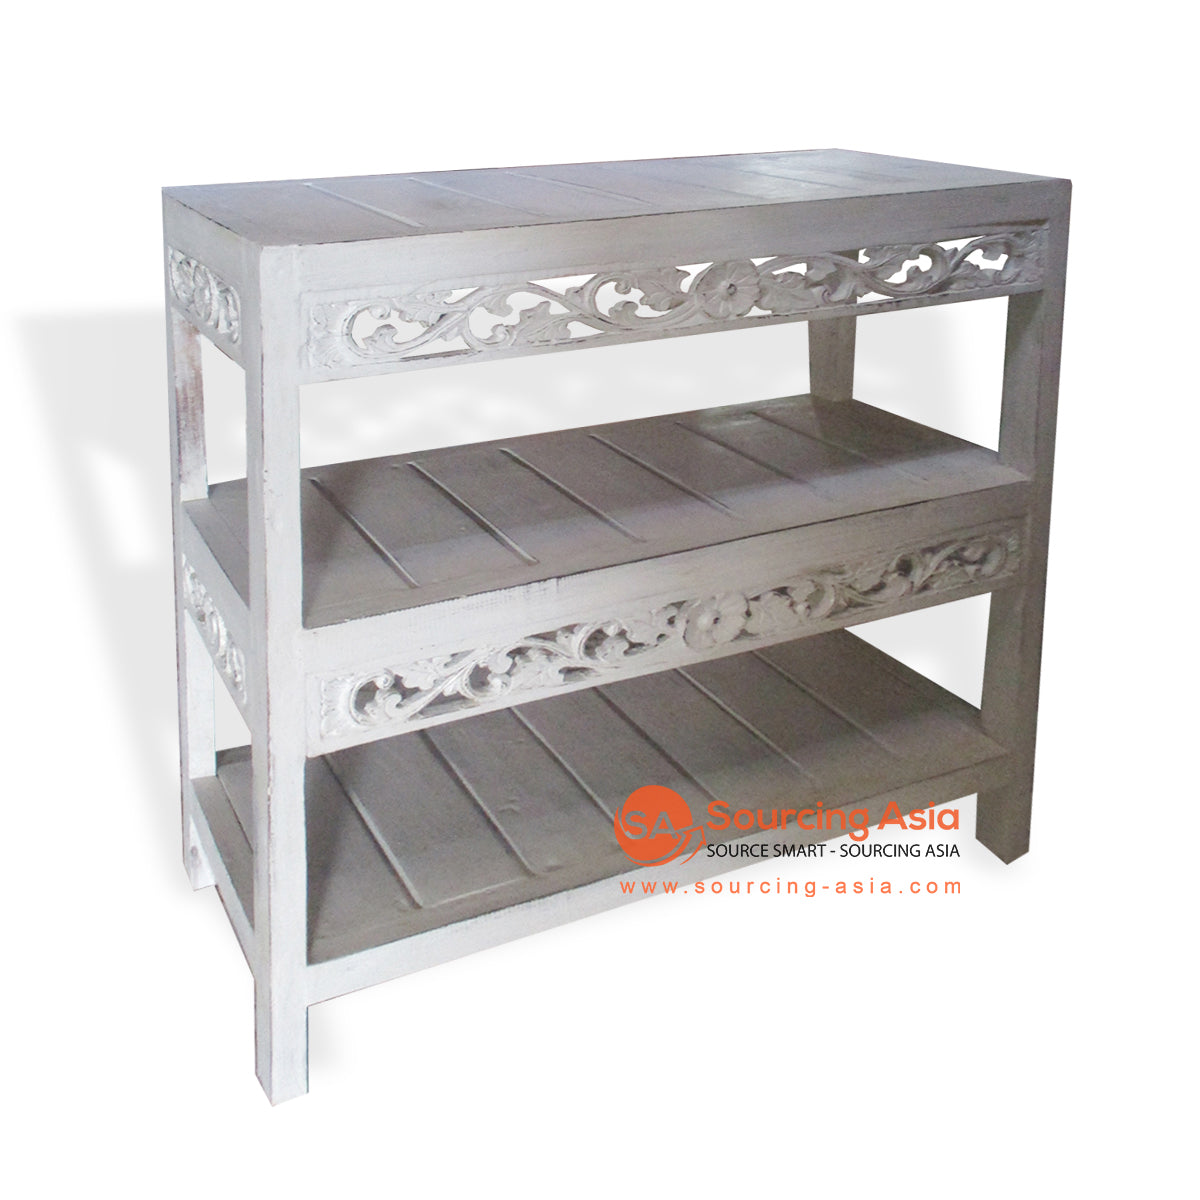 THE020 MEDIUM WHITE WASH DOUBLE CONSOLE TABLE